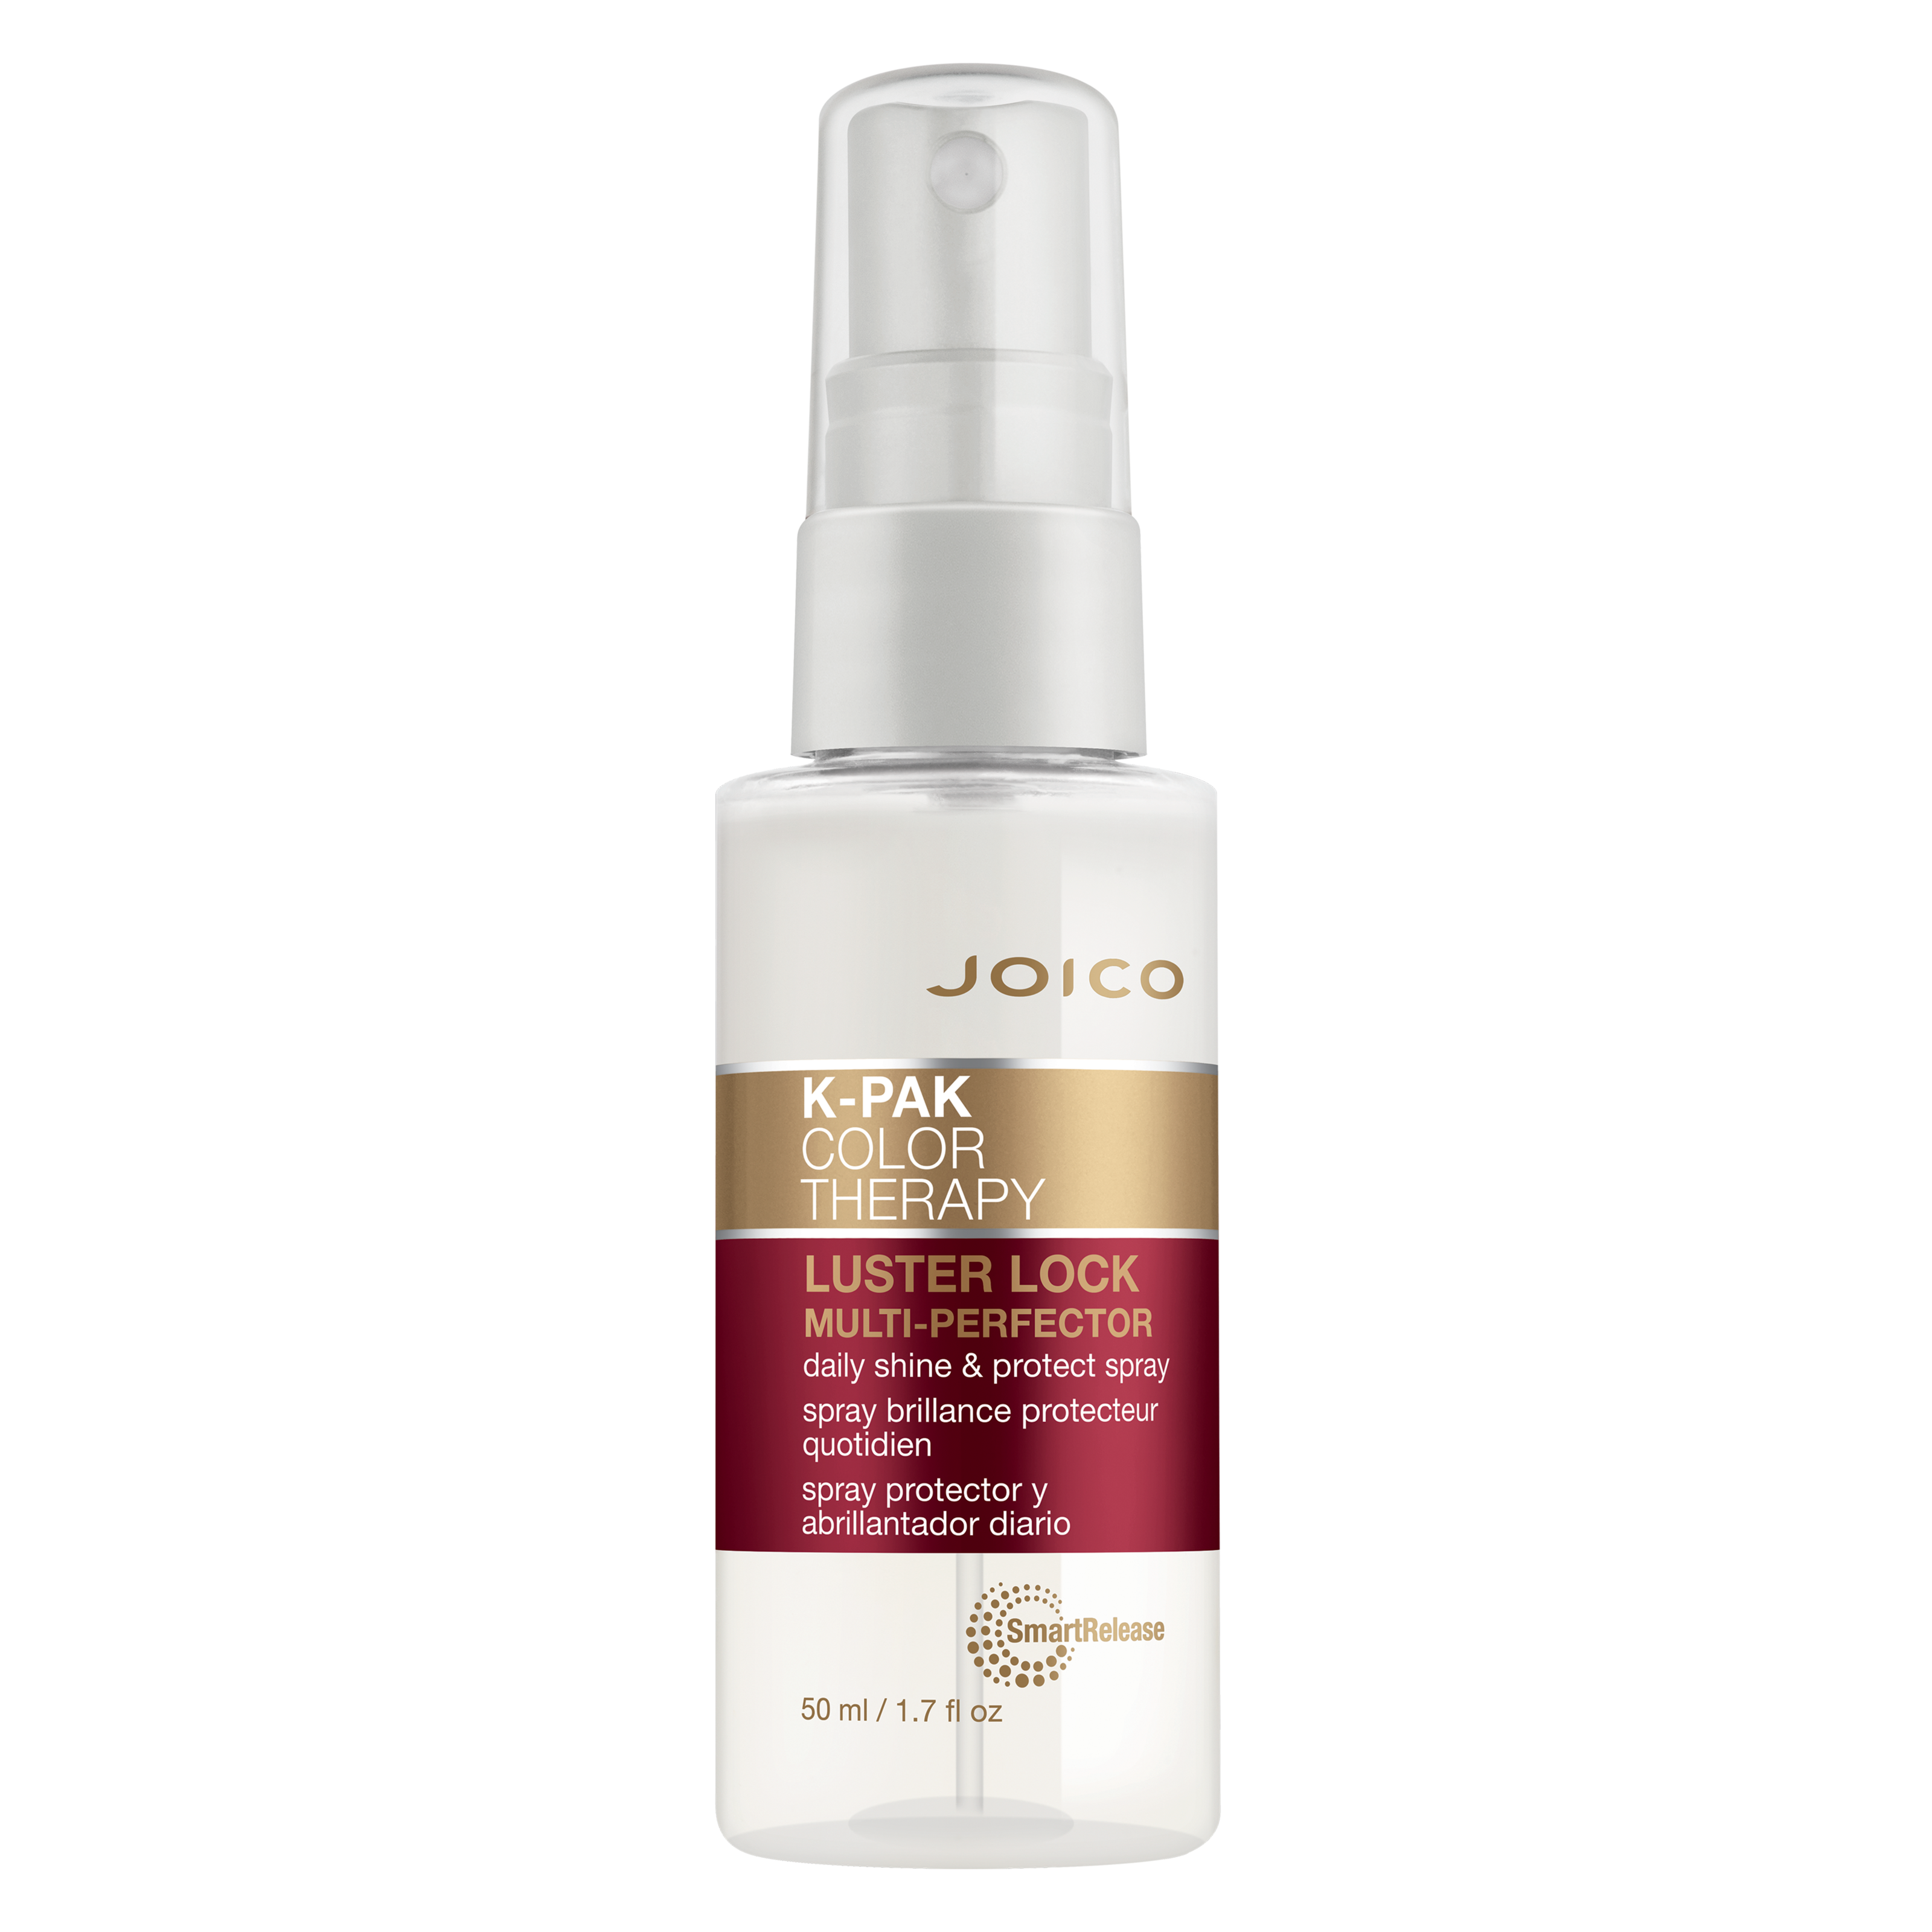 Joico K-pak Color Therapy Luster Lock Multi-Perfector 50 ml